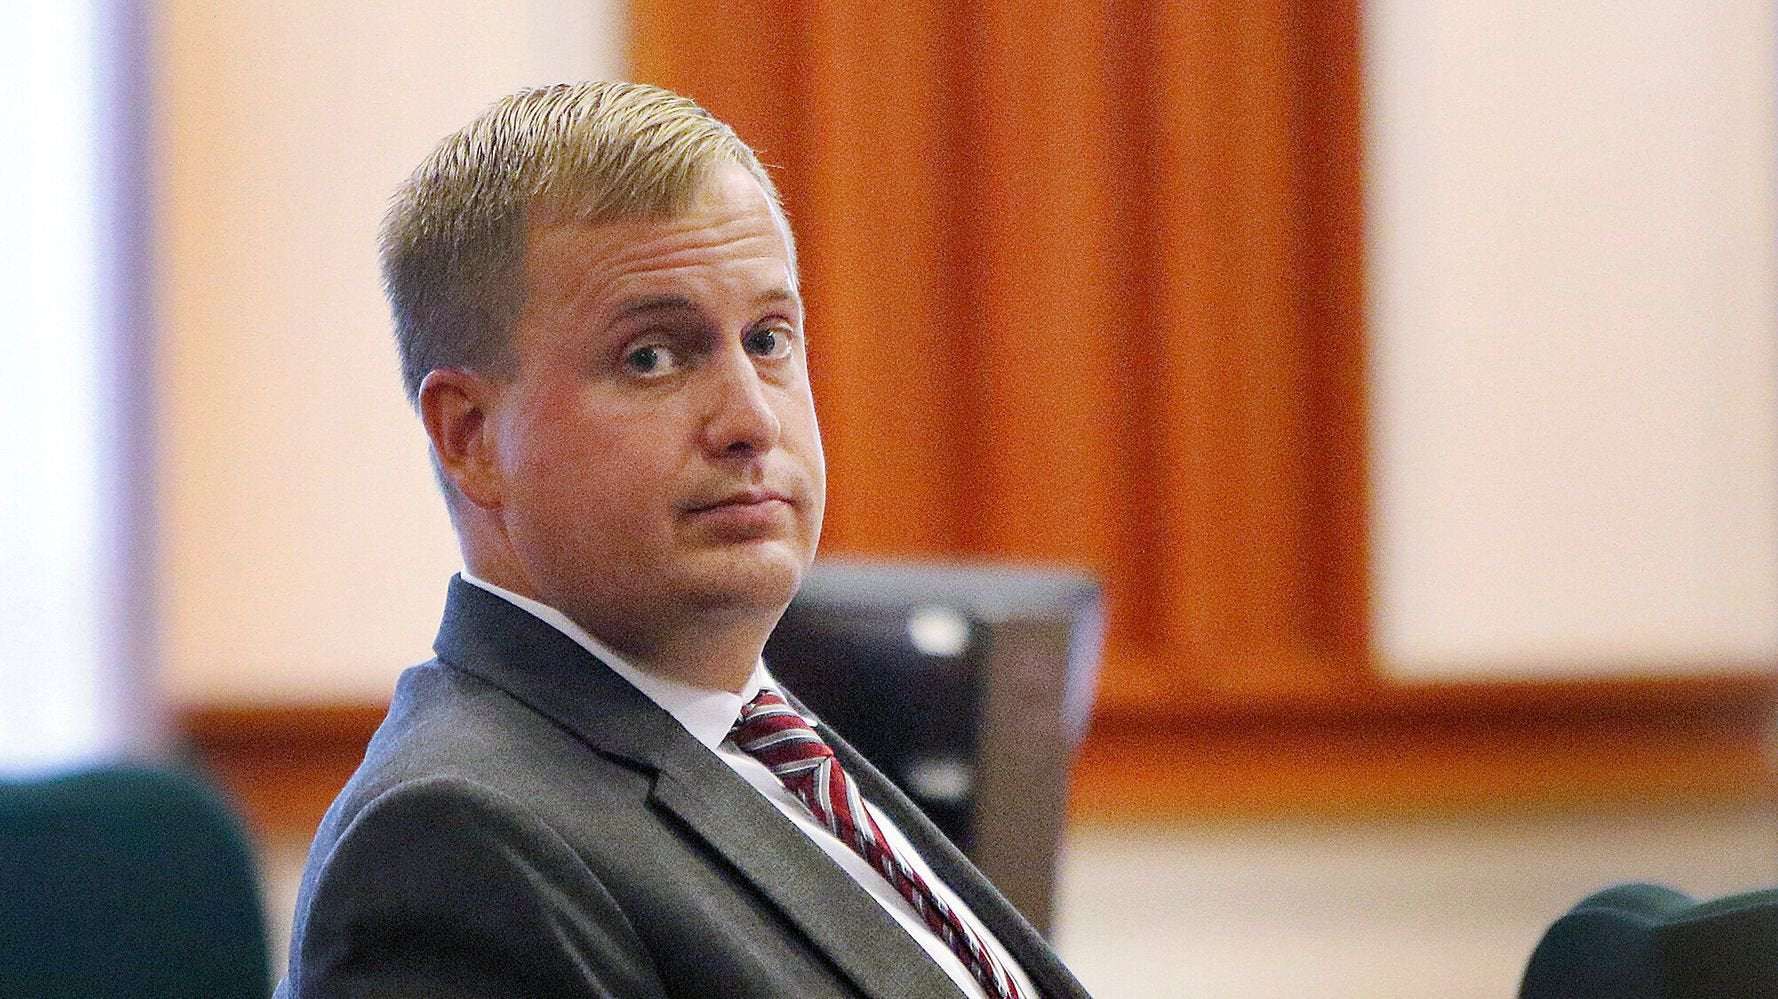 image for Former Idaho Lawmaker Convicted Of Raping 19-Year-Old Intern